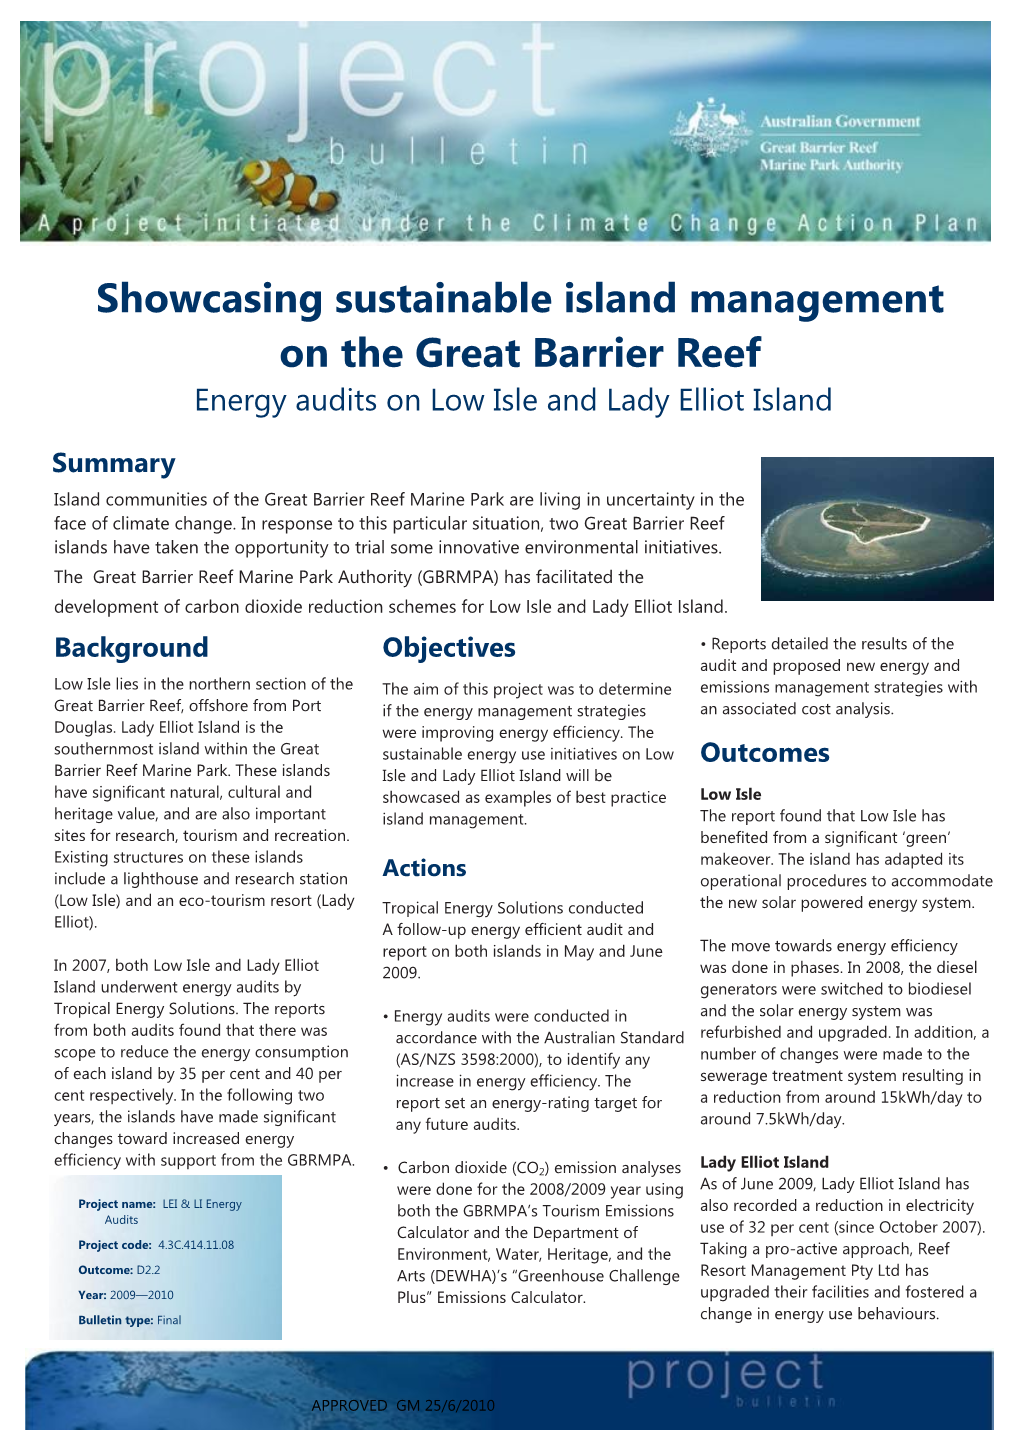 Showcasing Sustainable Island Management on the Great Barrier Reef Energy Audits on Low Isle and Lady Elliot Island